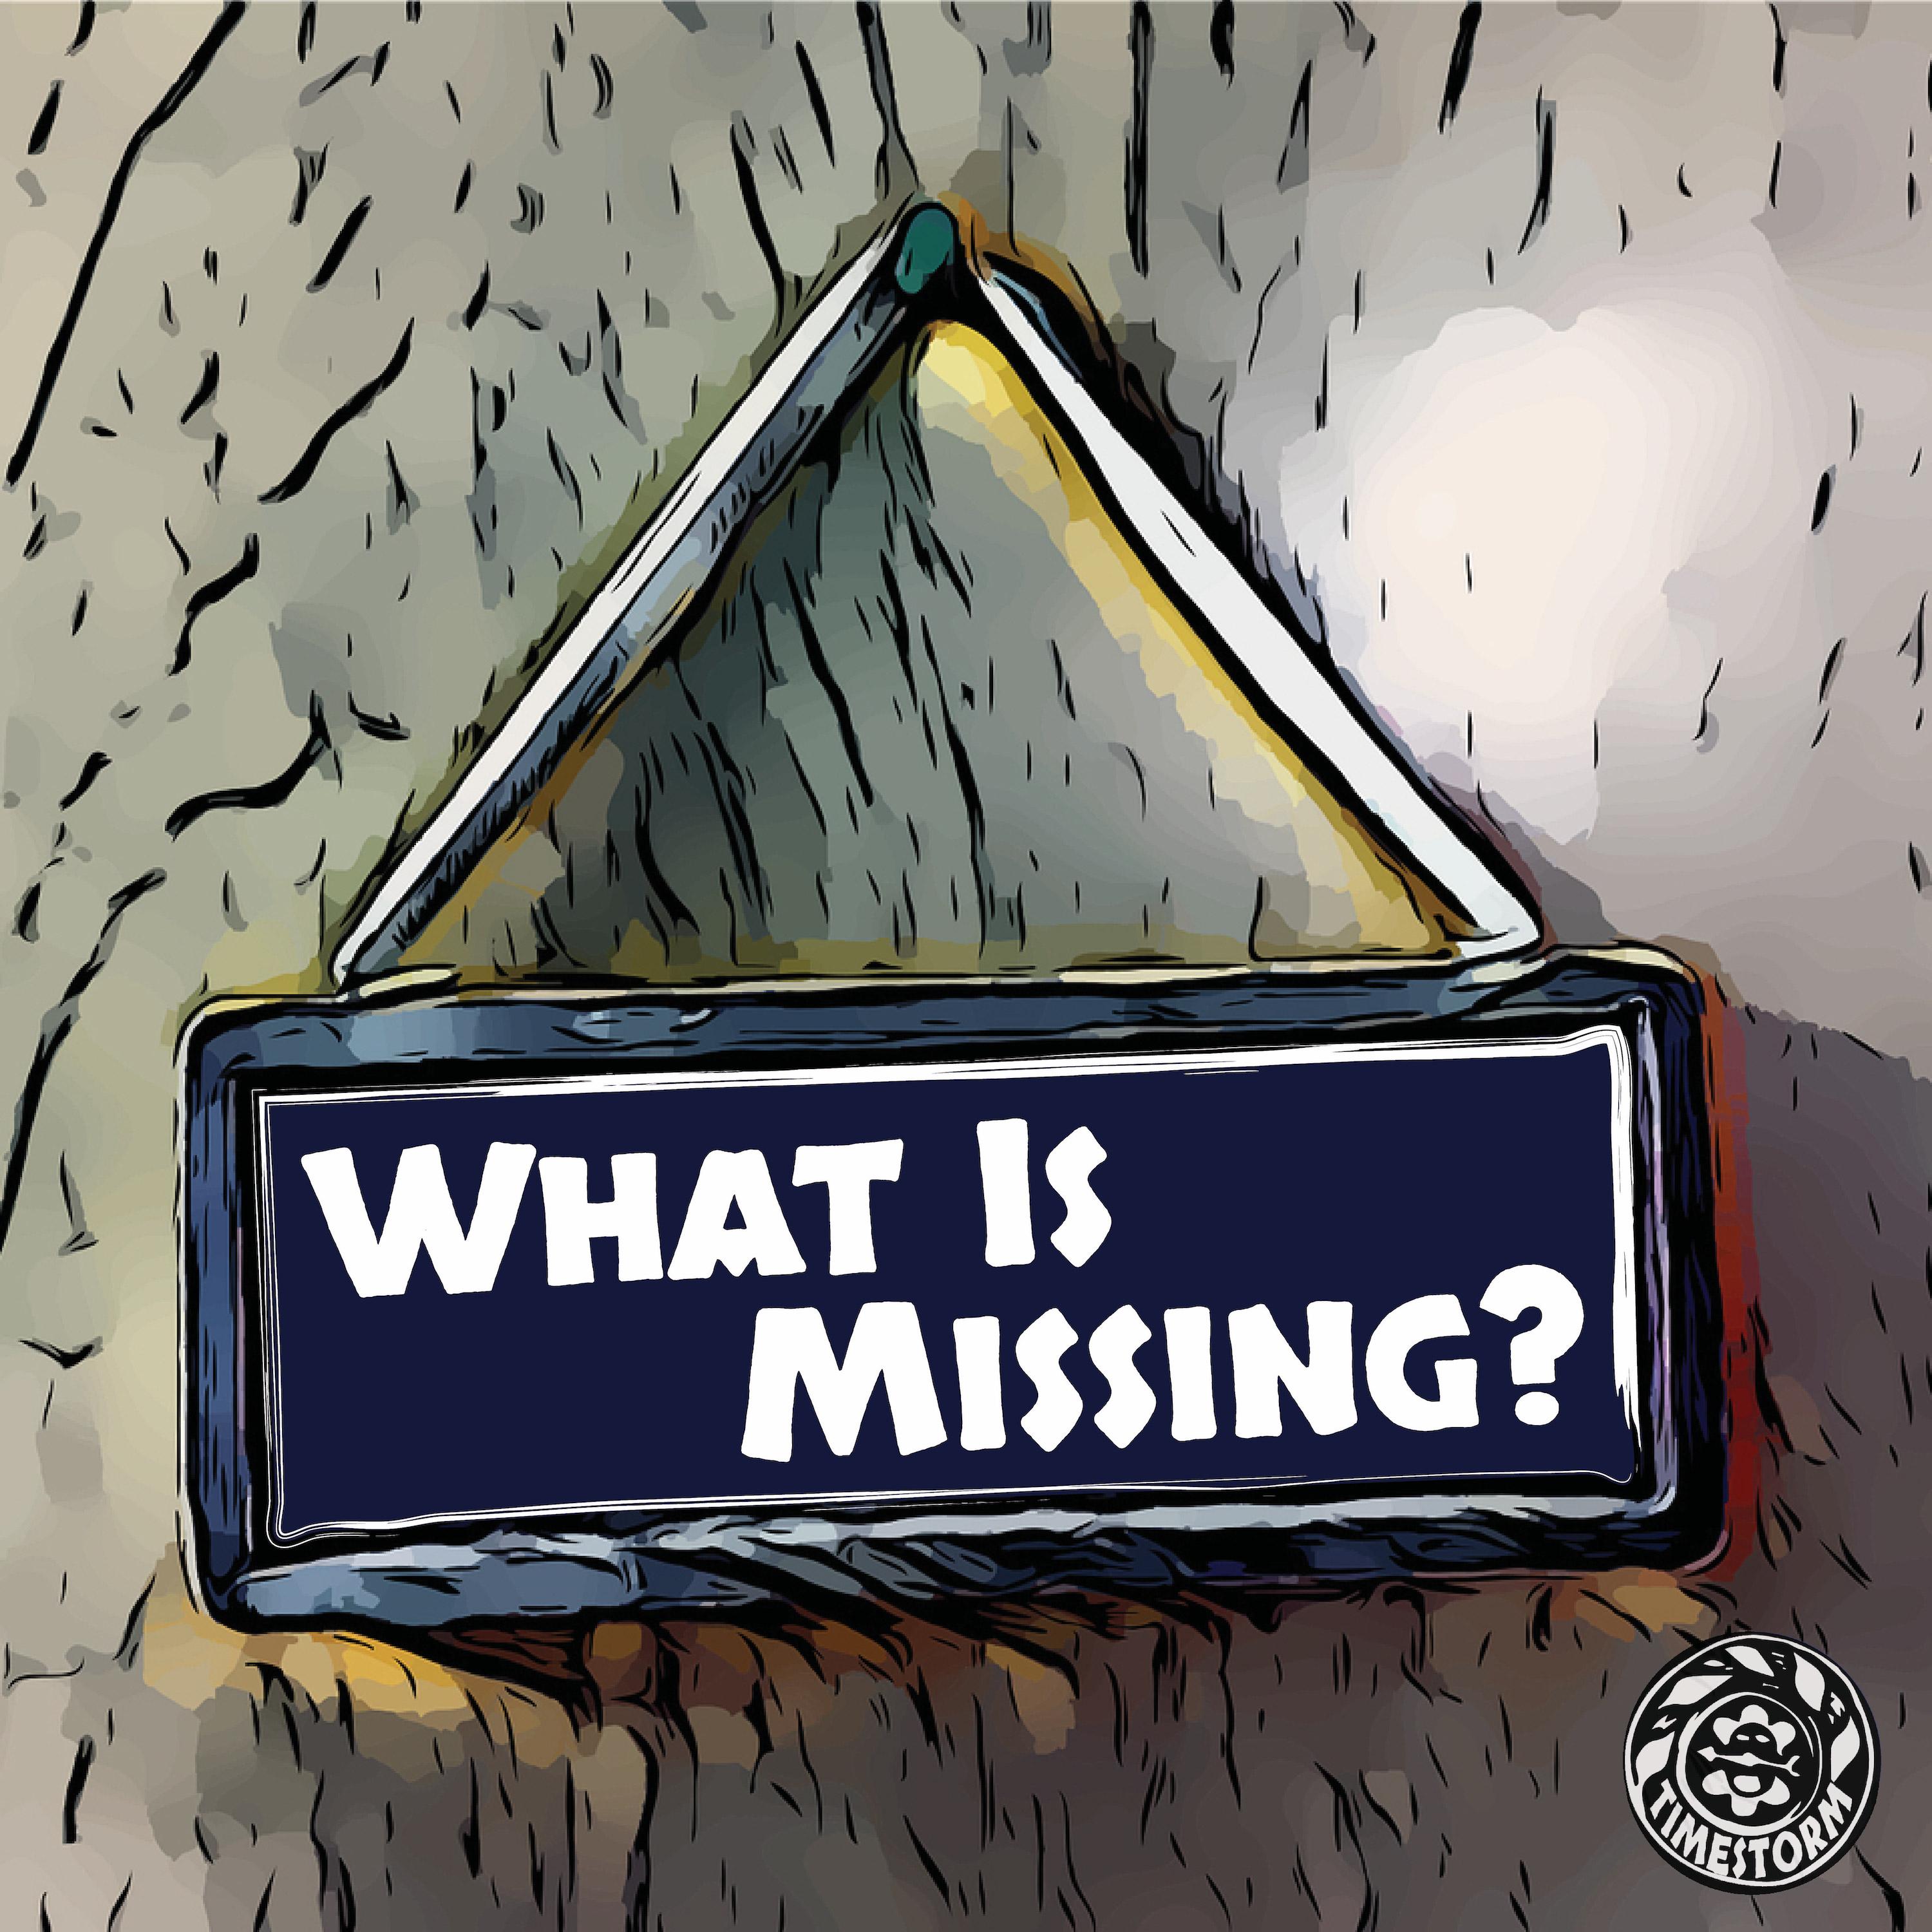 Thumbnail for "Episode 11: What Is Missing?".